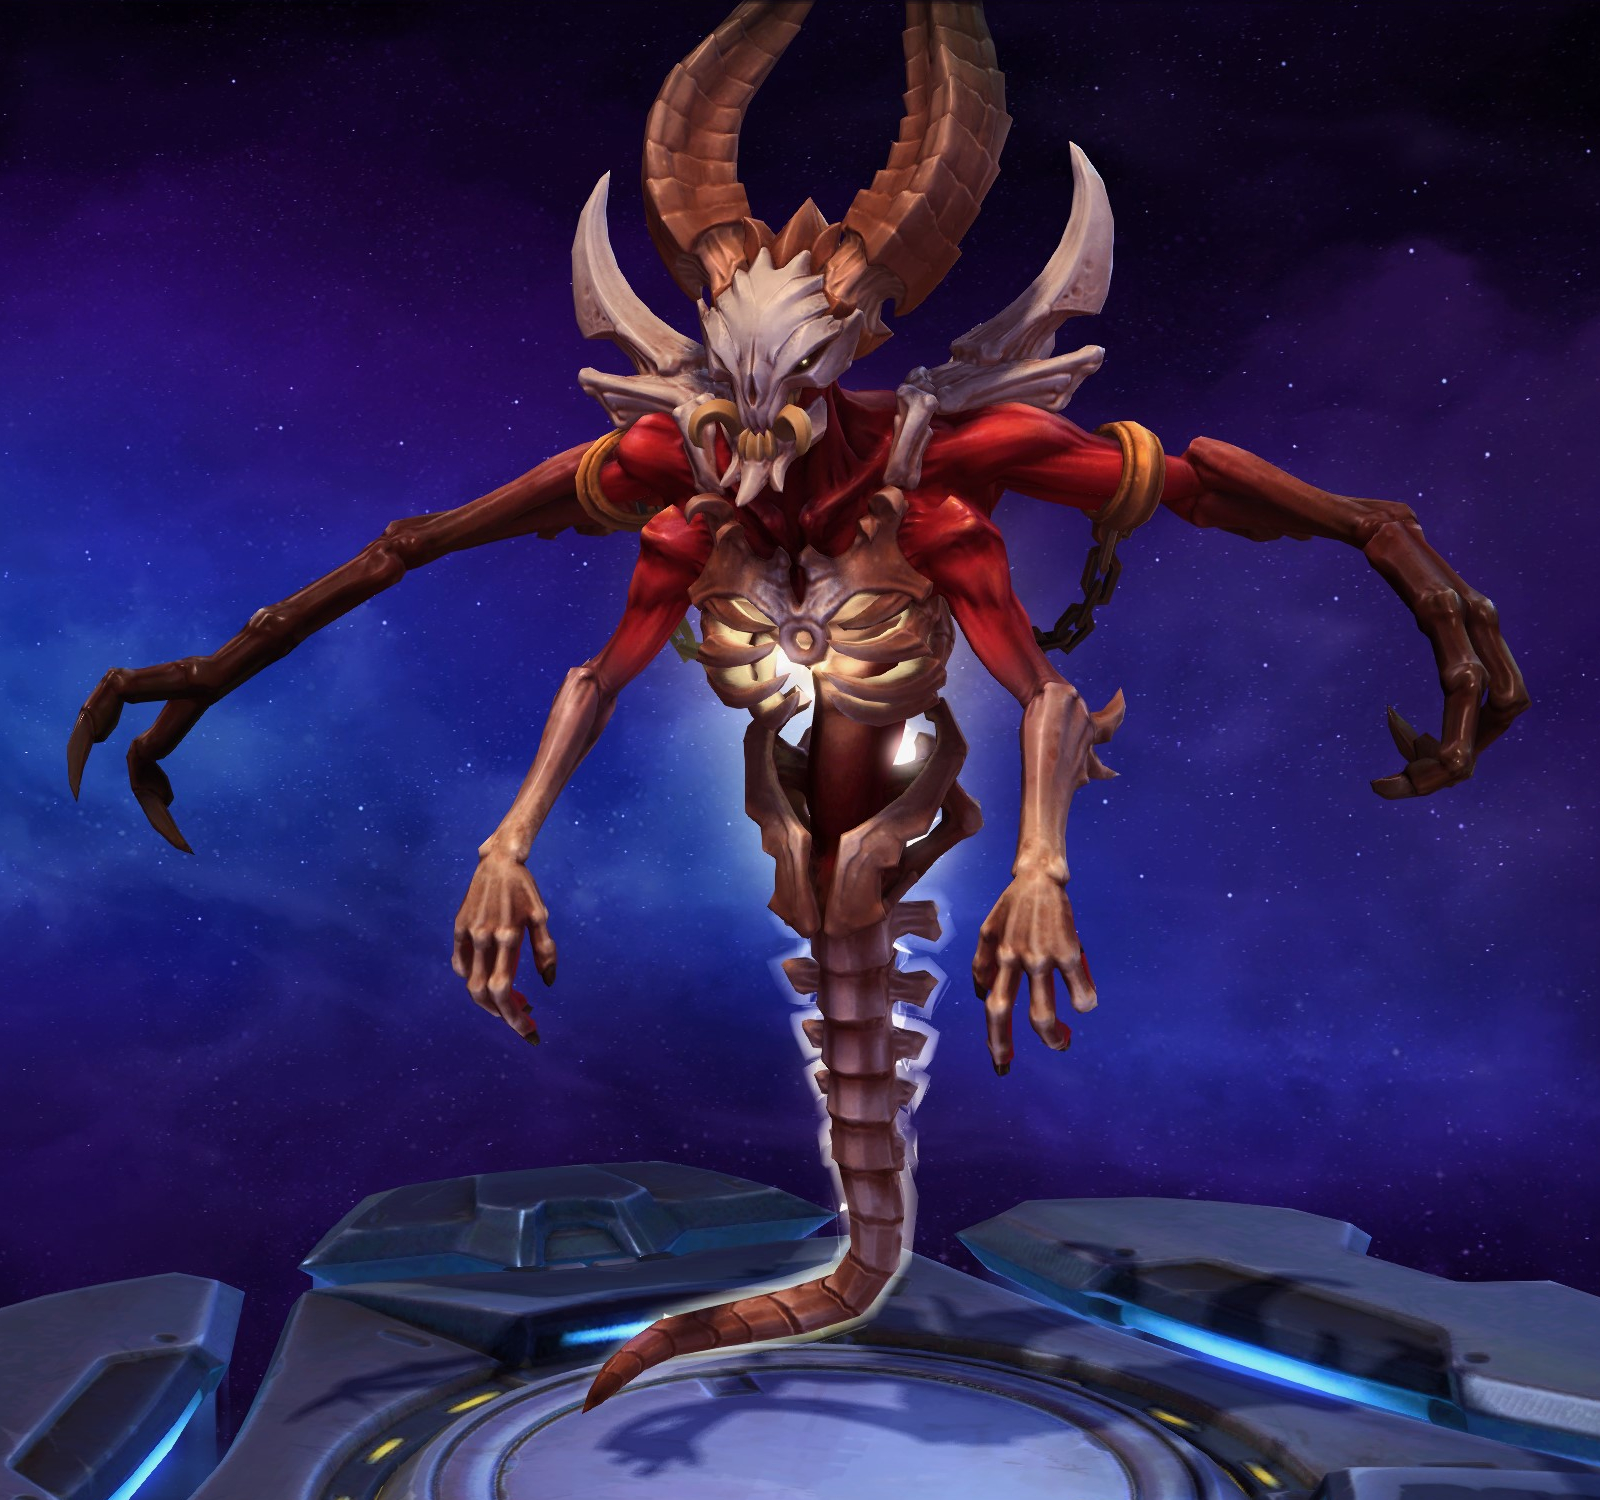 Mephisto Q build bad - General Discussion - Heroes of the Storm Forums